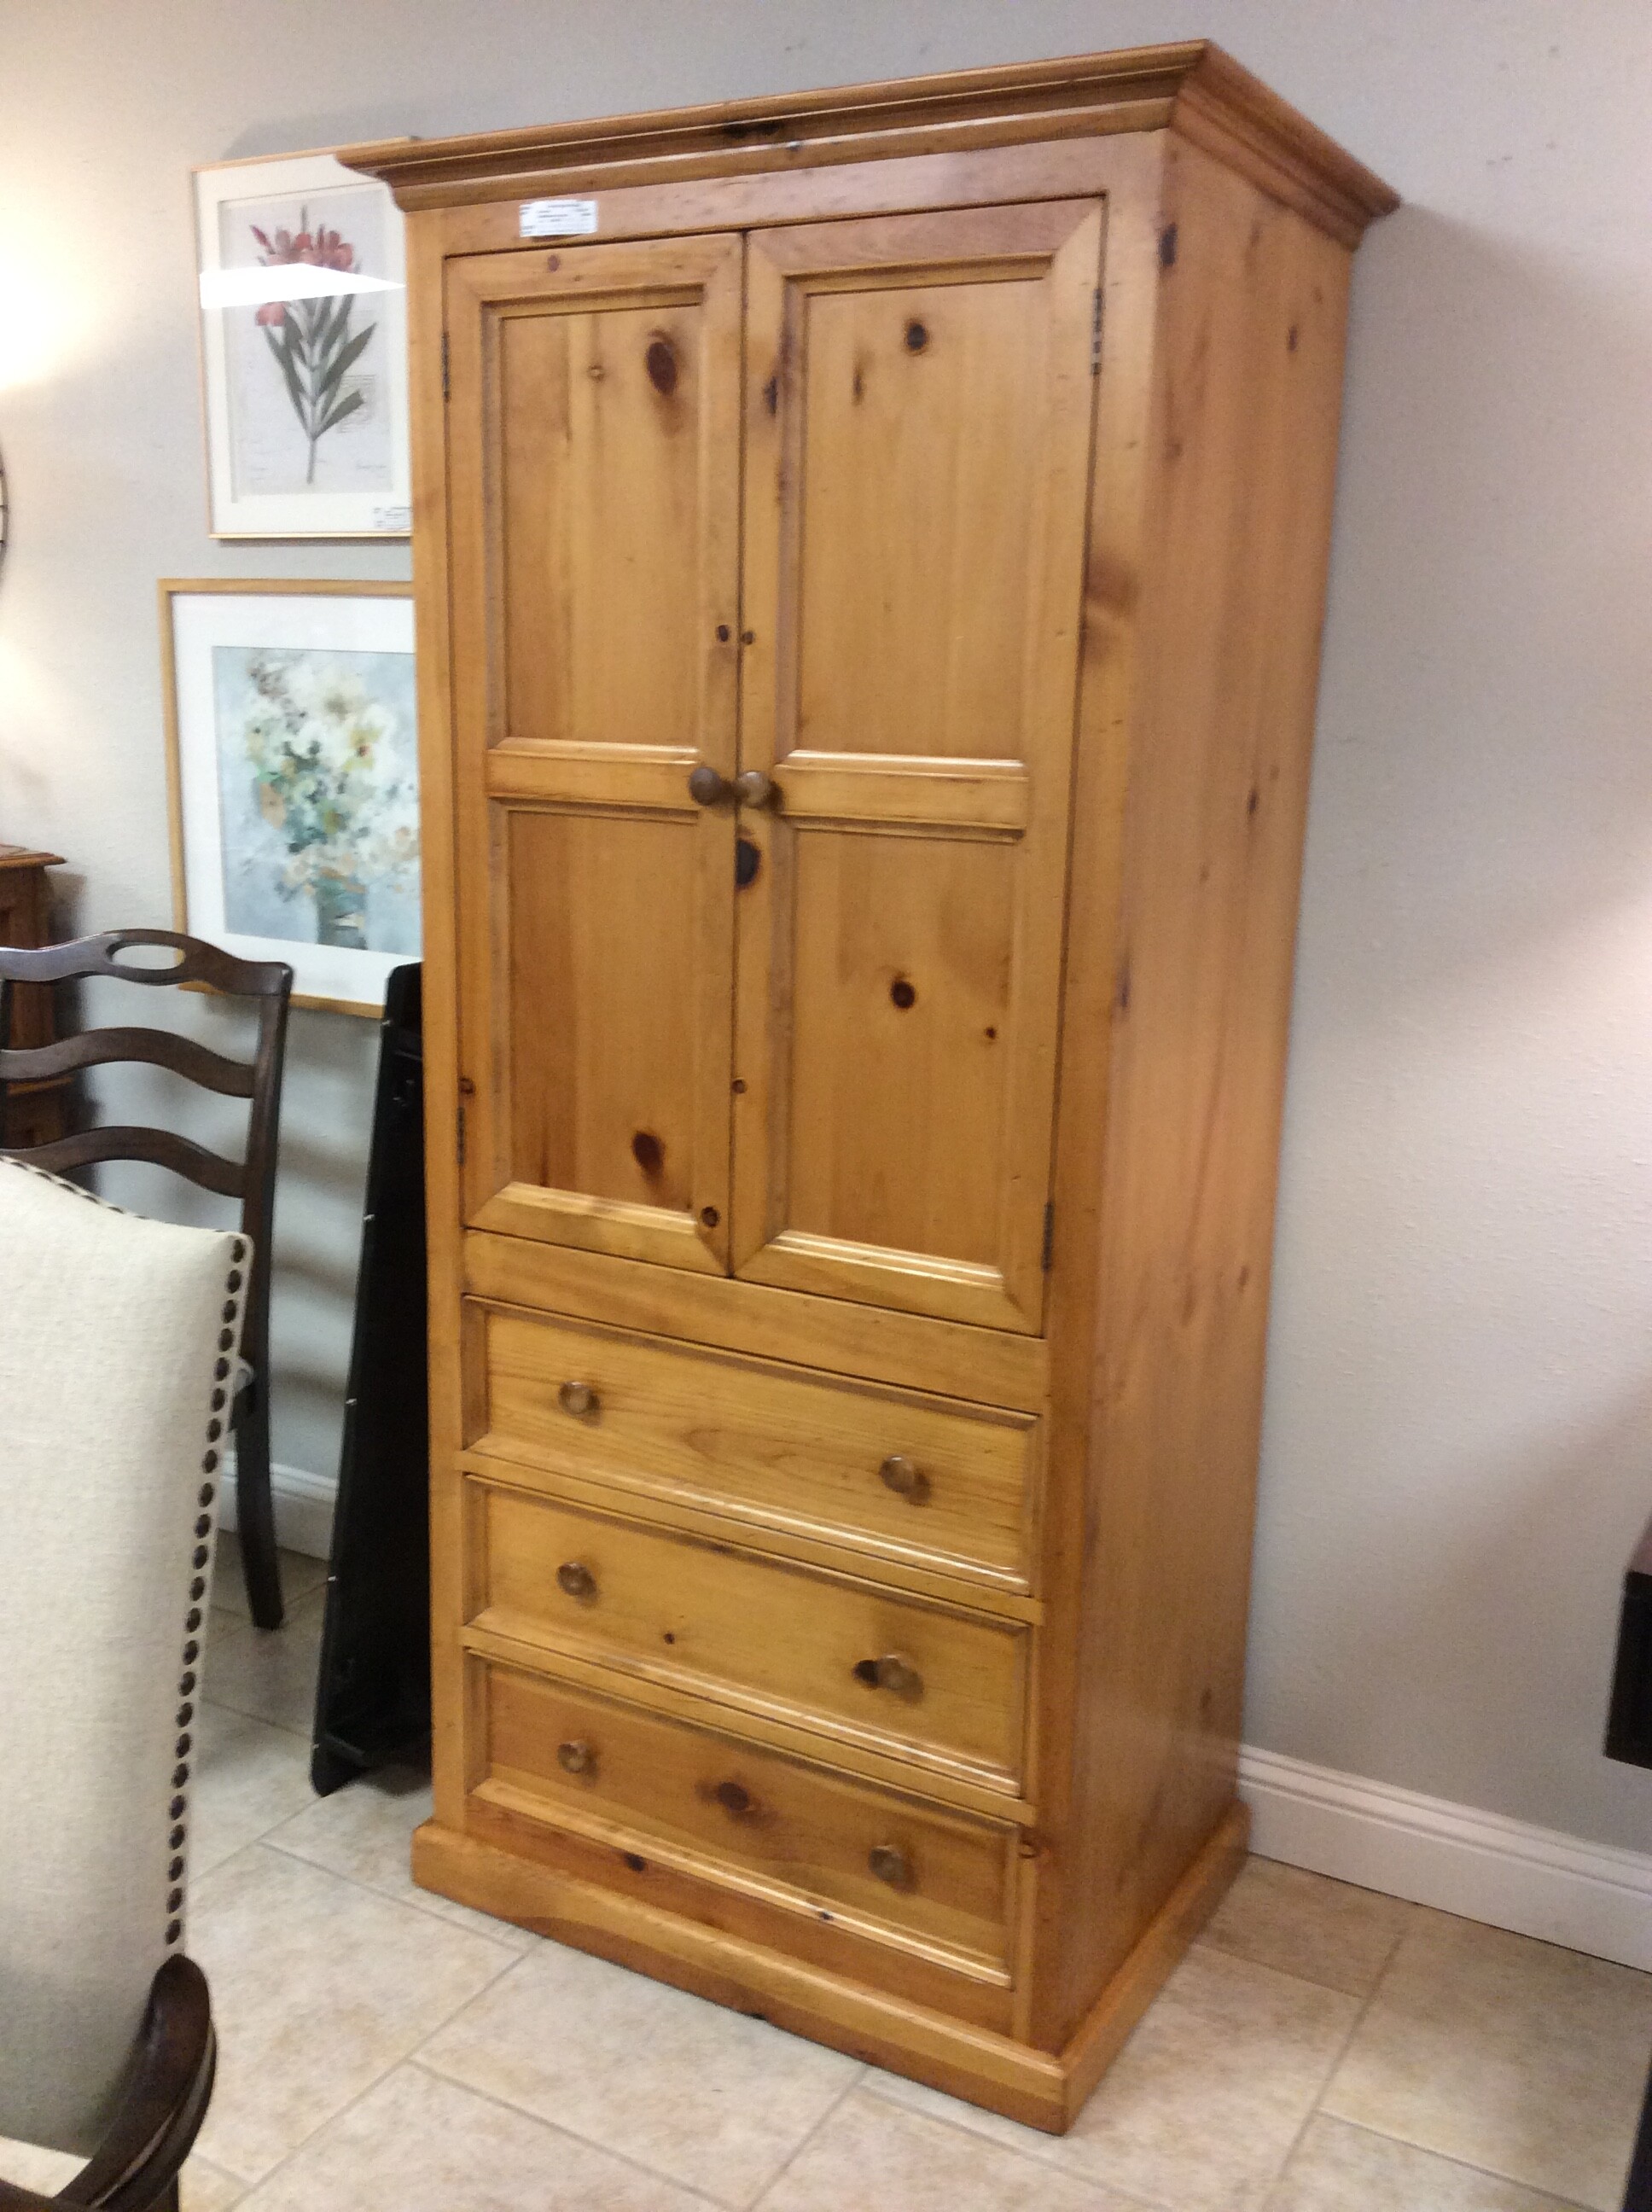 This is a Pine wood, Eddie Bauer Armoire. This armmoire has a cabinet with 2 shelfs and 3 drawers.